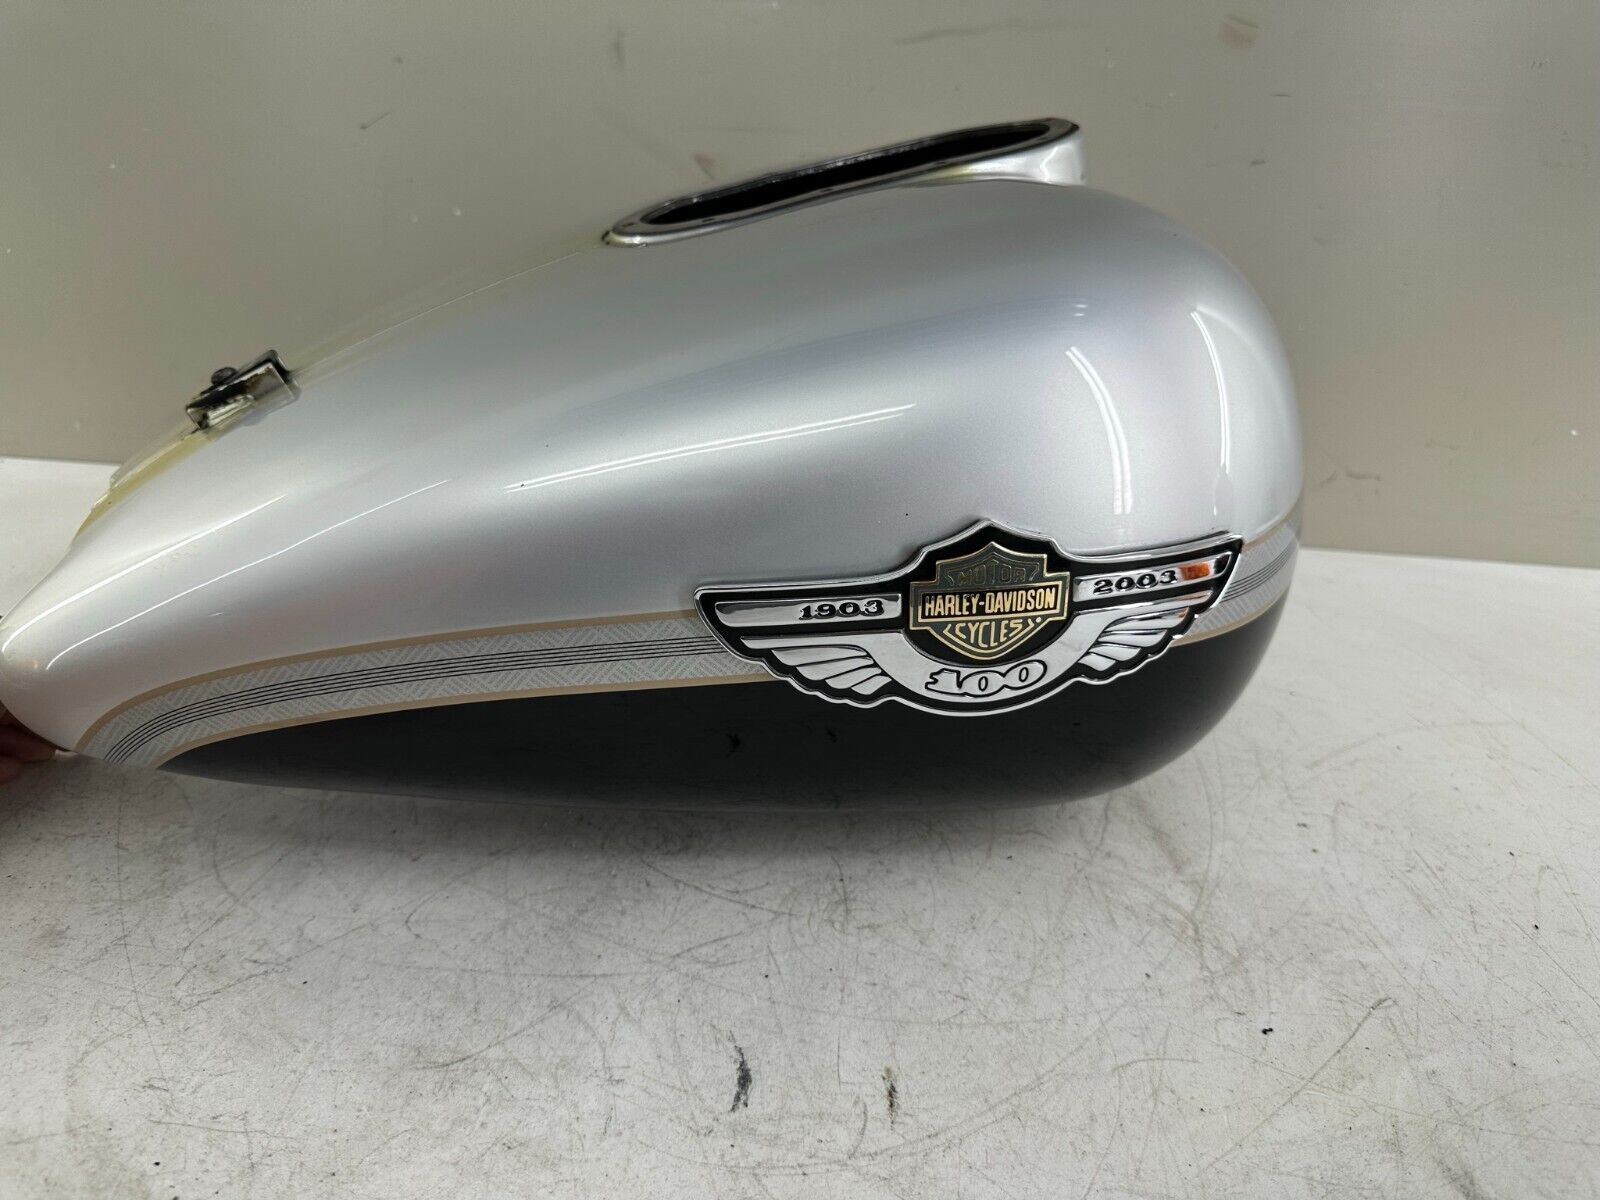 2003 HARLEY FLH ELECTRA GLIDE 100TH ANNIVERSARY PAINT GAS FUEL TANK w/ BADGES